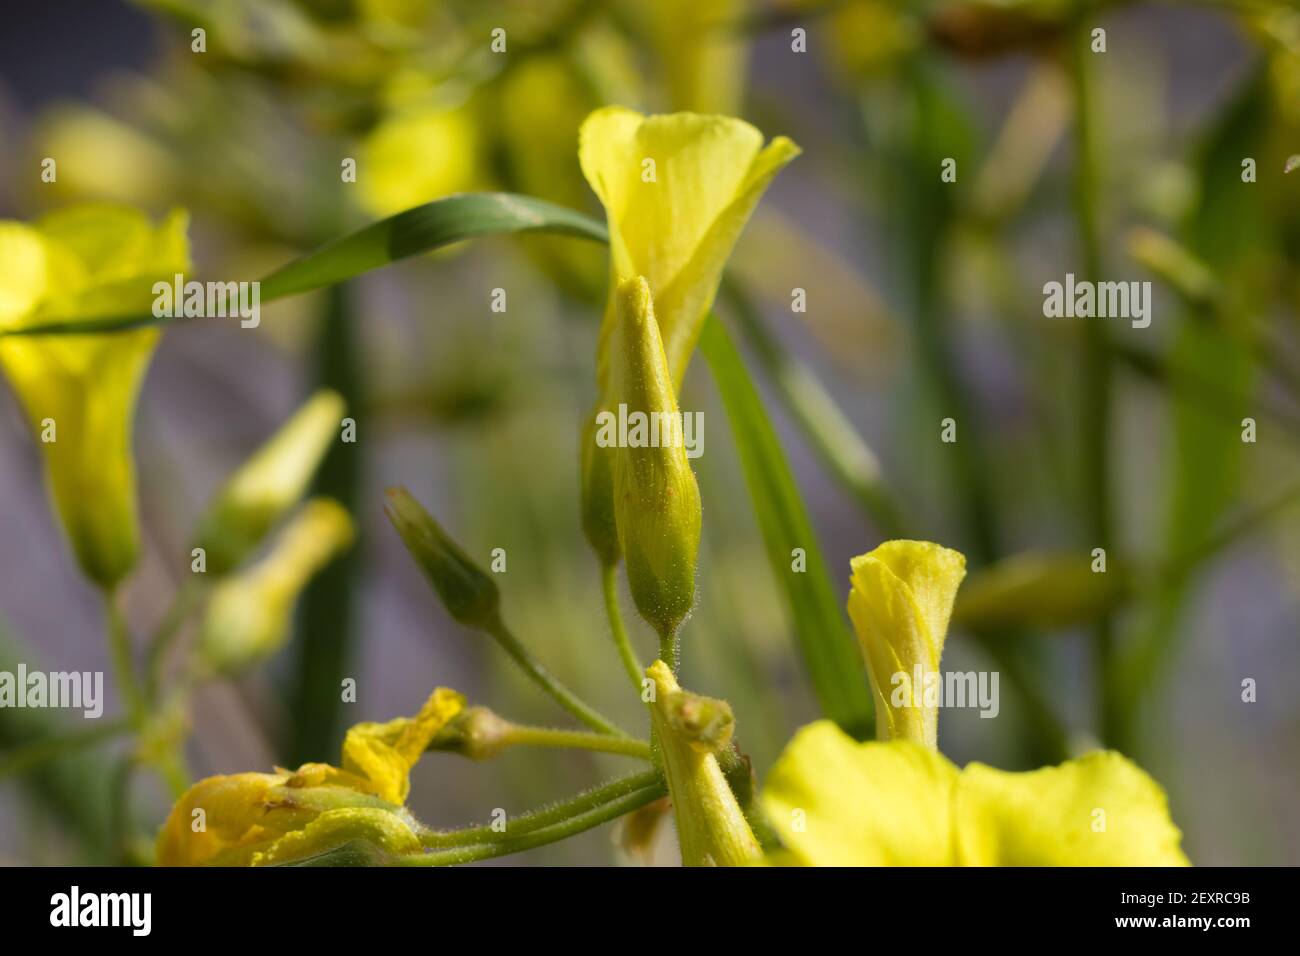 Yellow flowers of Bermuda buttercup, blurred background Stock Photo